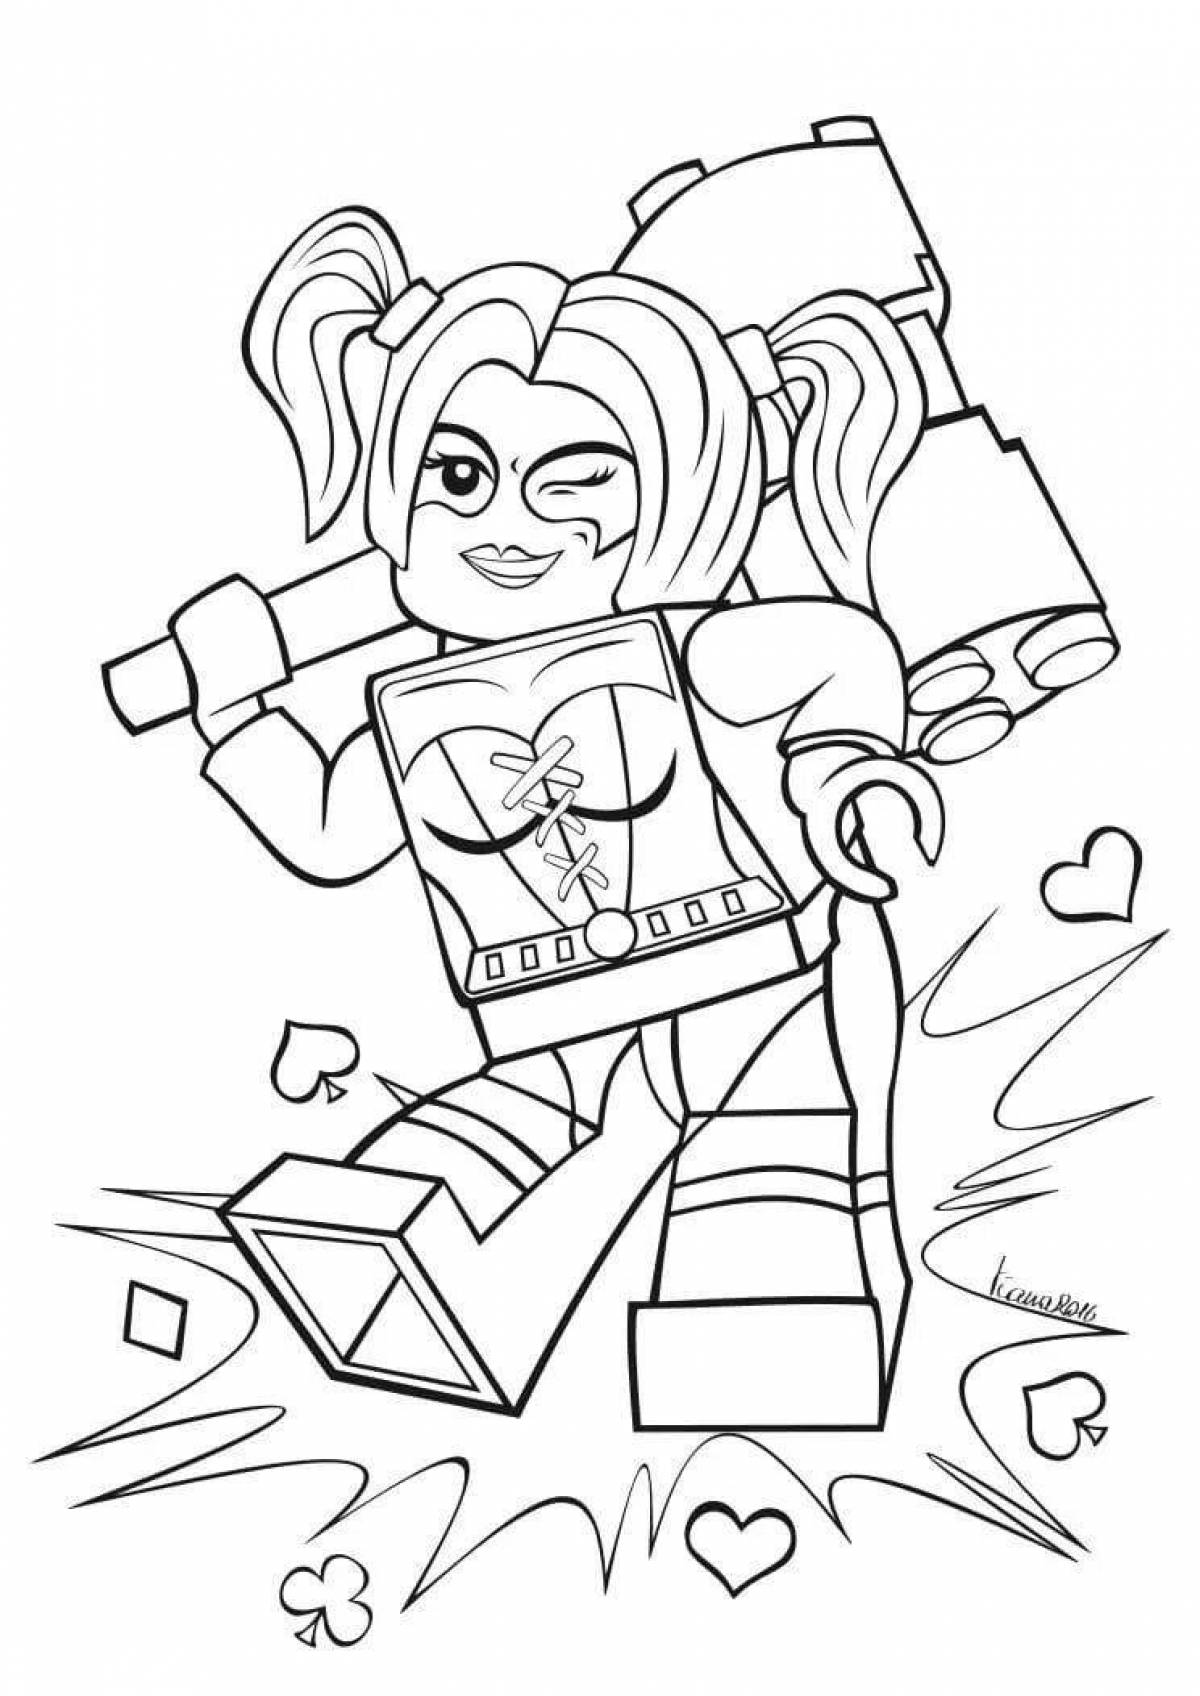 Charming queen roblox coloring book